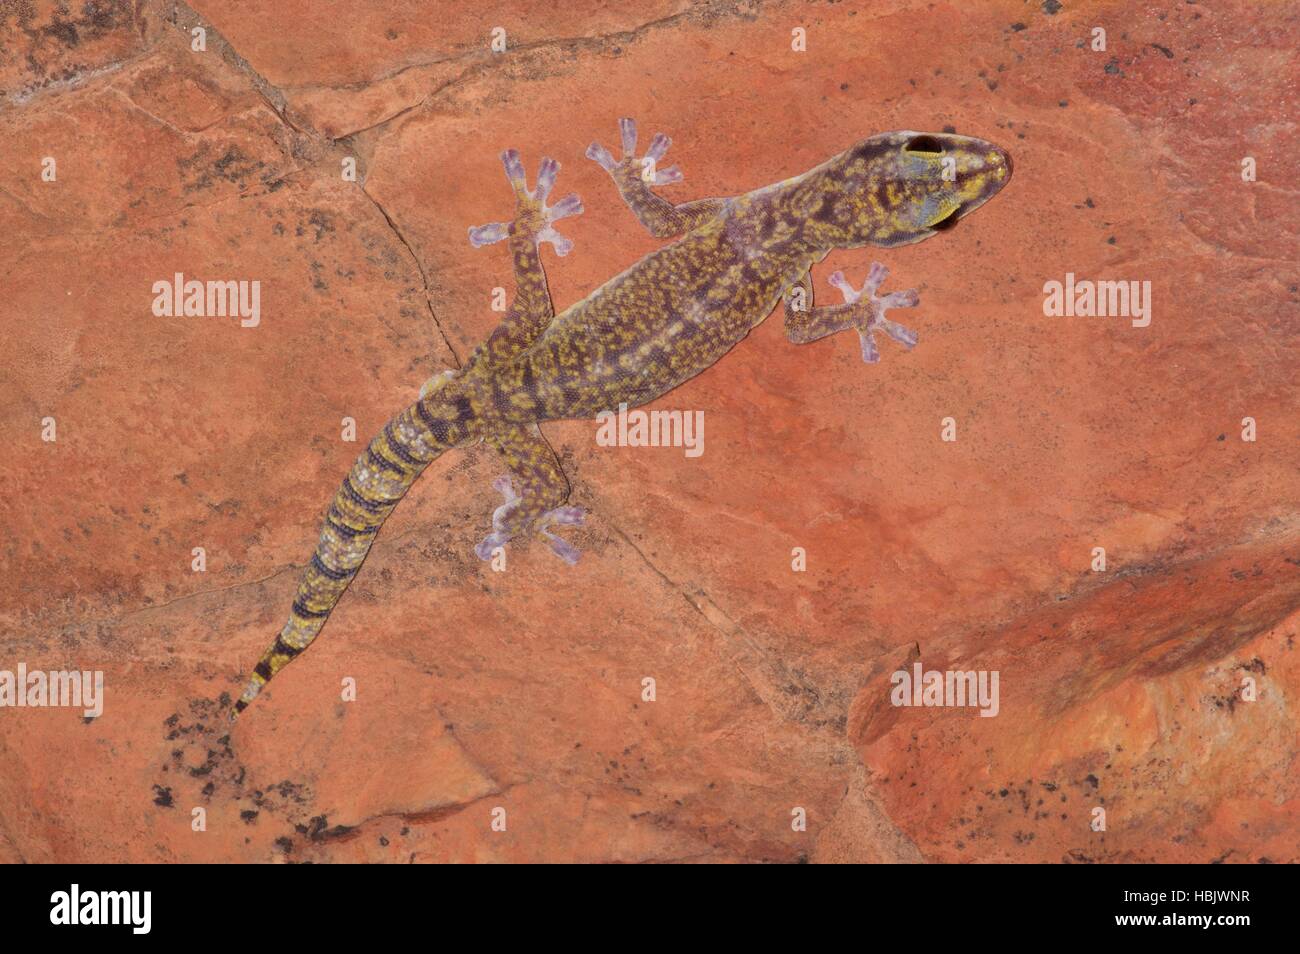 A Marbled Velvet Gecko (Oedura marmorata) clinging to a vertical red rock face in Ormiston Gorge, Northern Territory, Australia Stock Photo